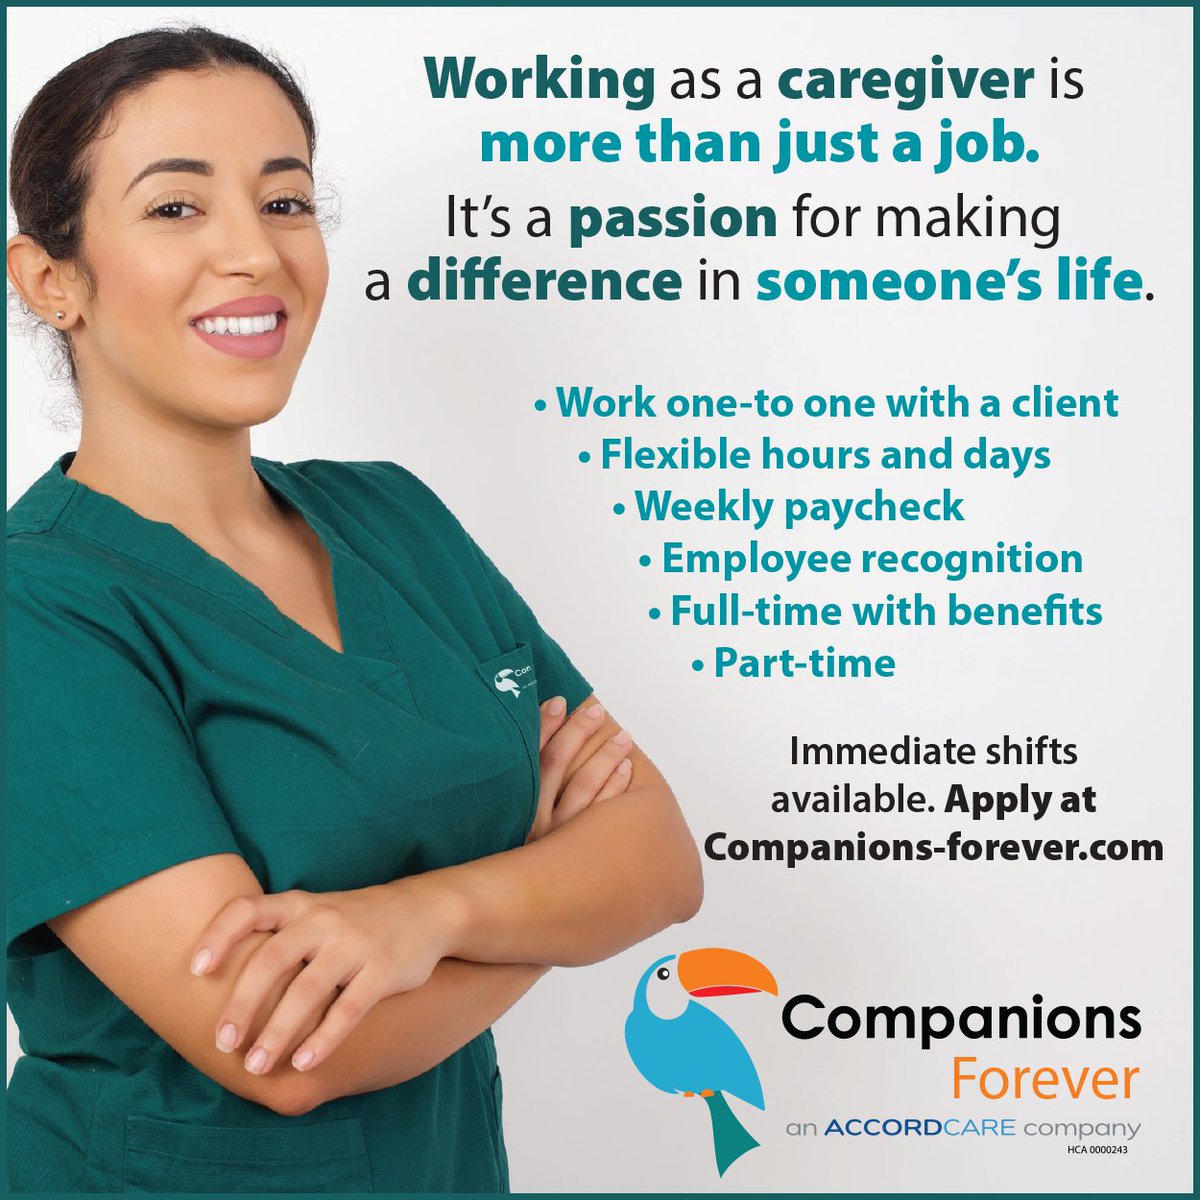 Our clients need an awesome caregiver like you! @Companions4Evr is hiring for flexible full-time and part-time positions!
All job openings are listed here accordcare.com/careers/
#HHAjobs #PCAjobs #HHA #flexiblework #homehealthcare #caregiverjobs #caregiver